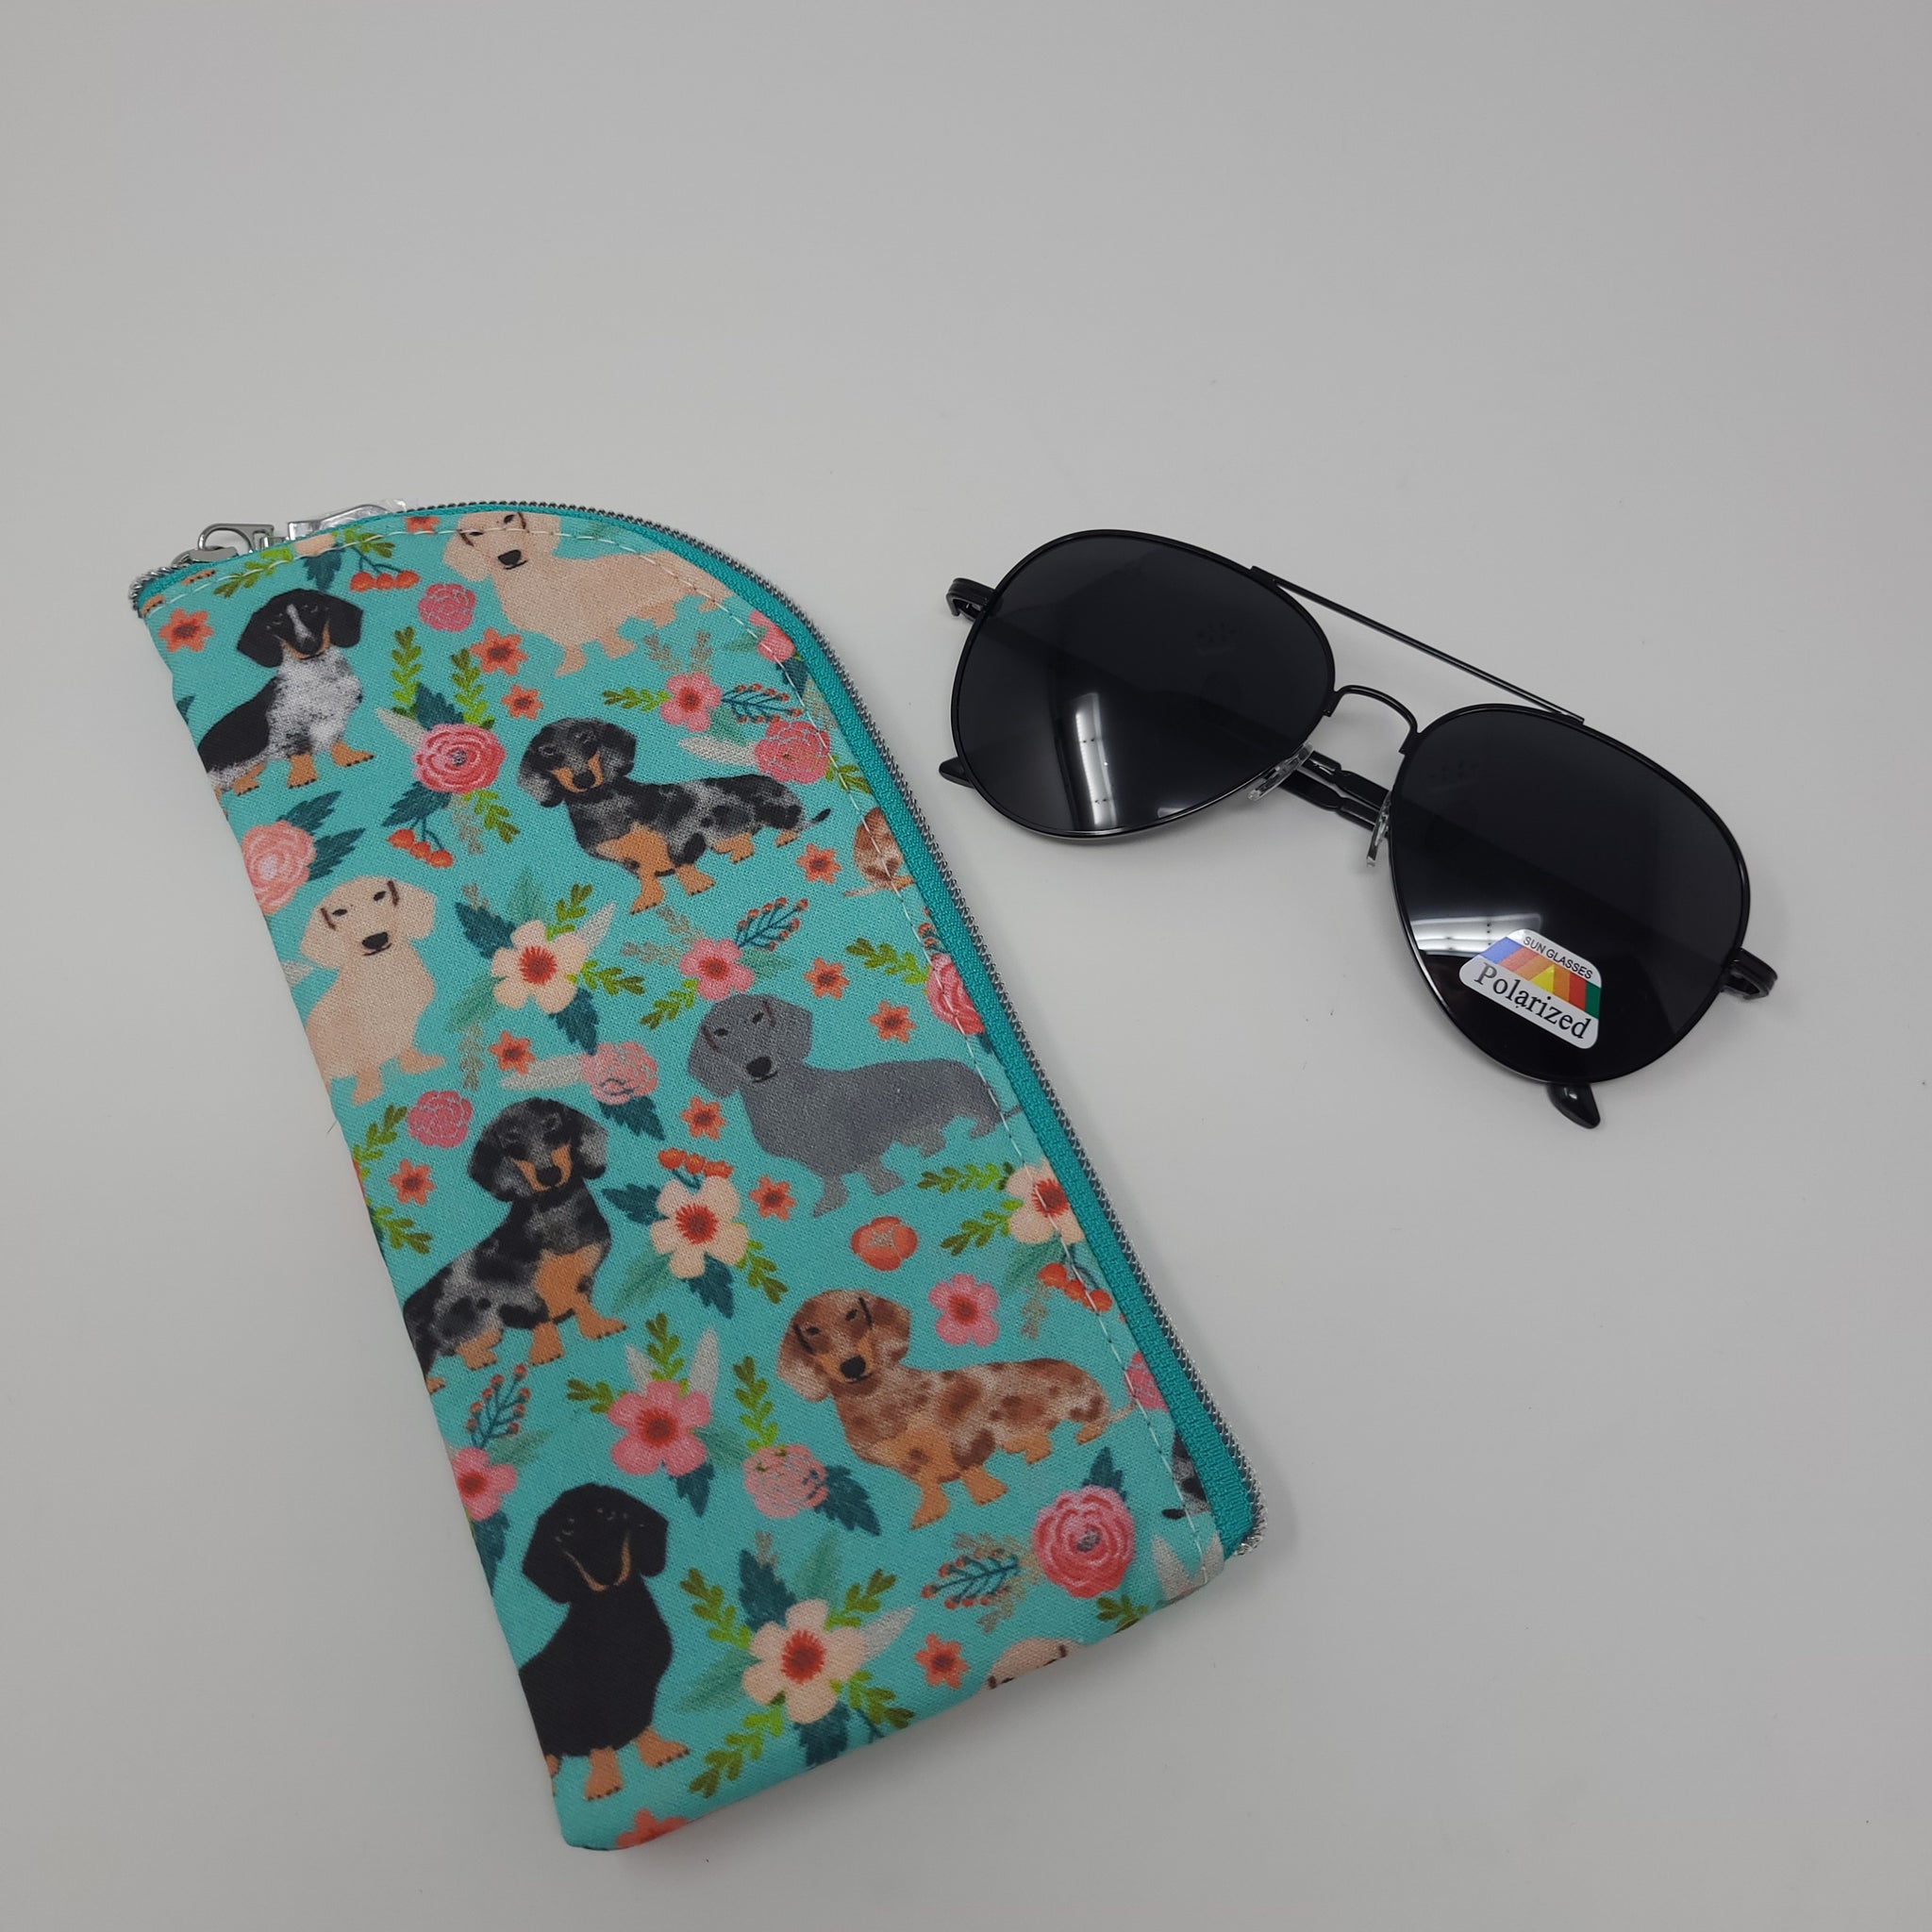 Sunglasses Pouch - Floral Dachshunds (Teal)